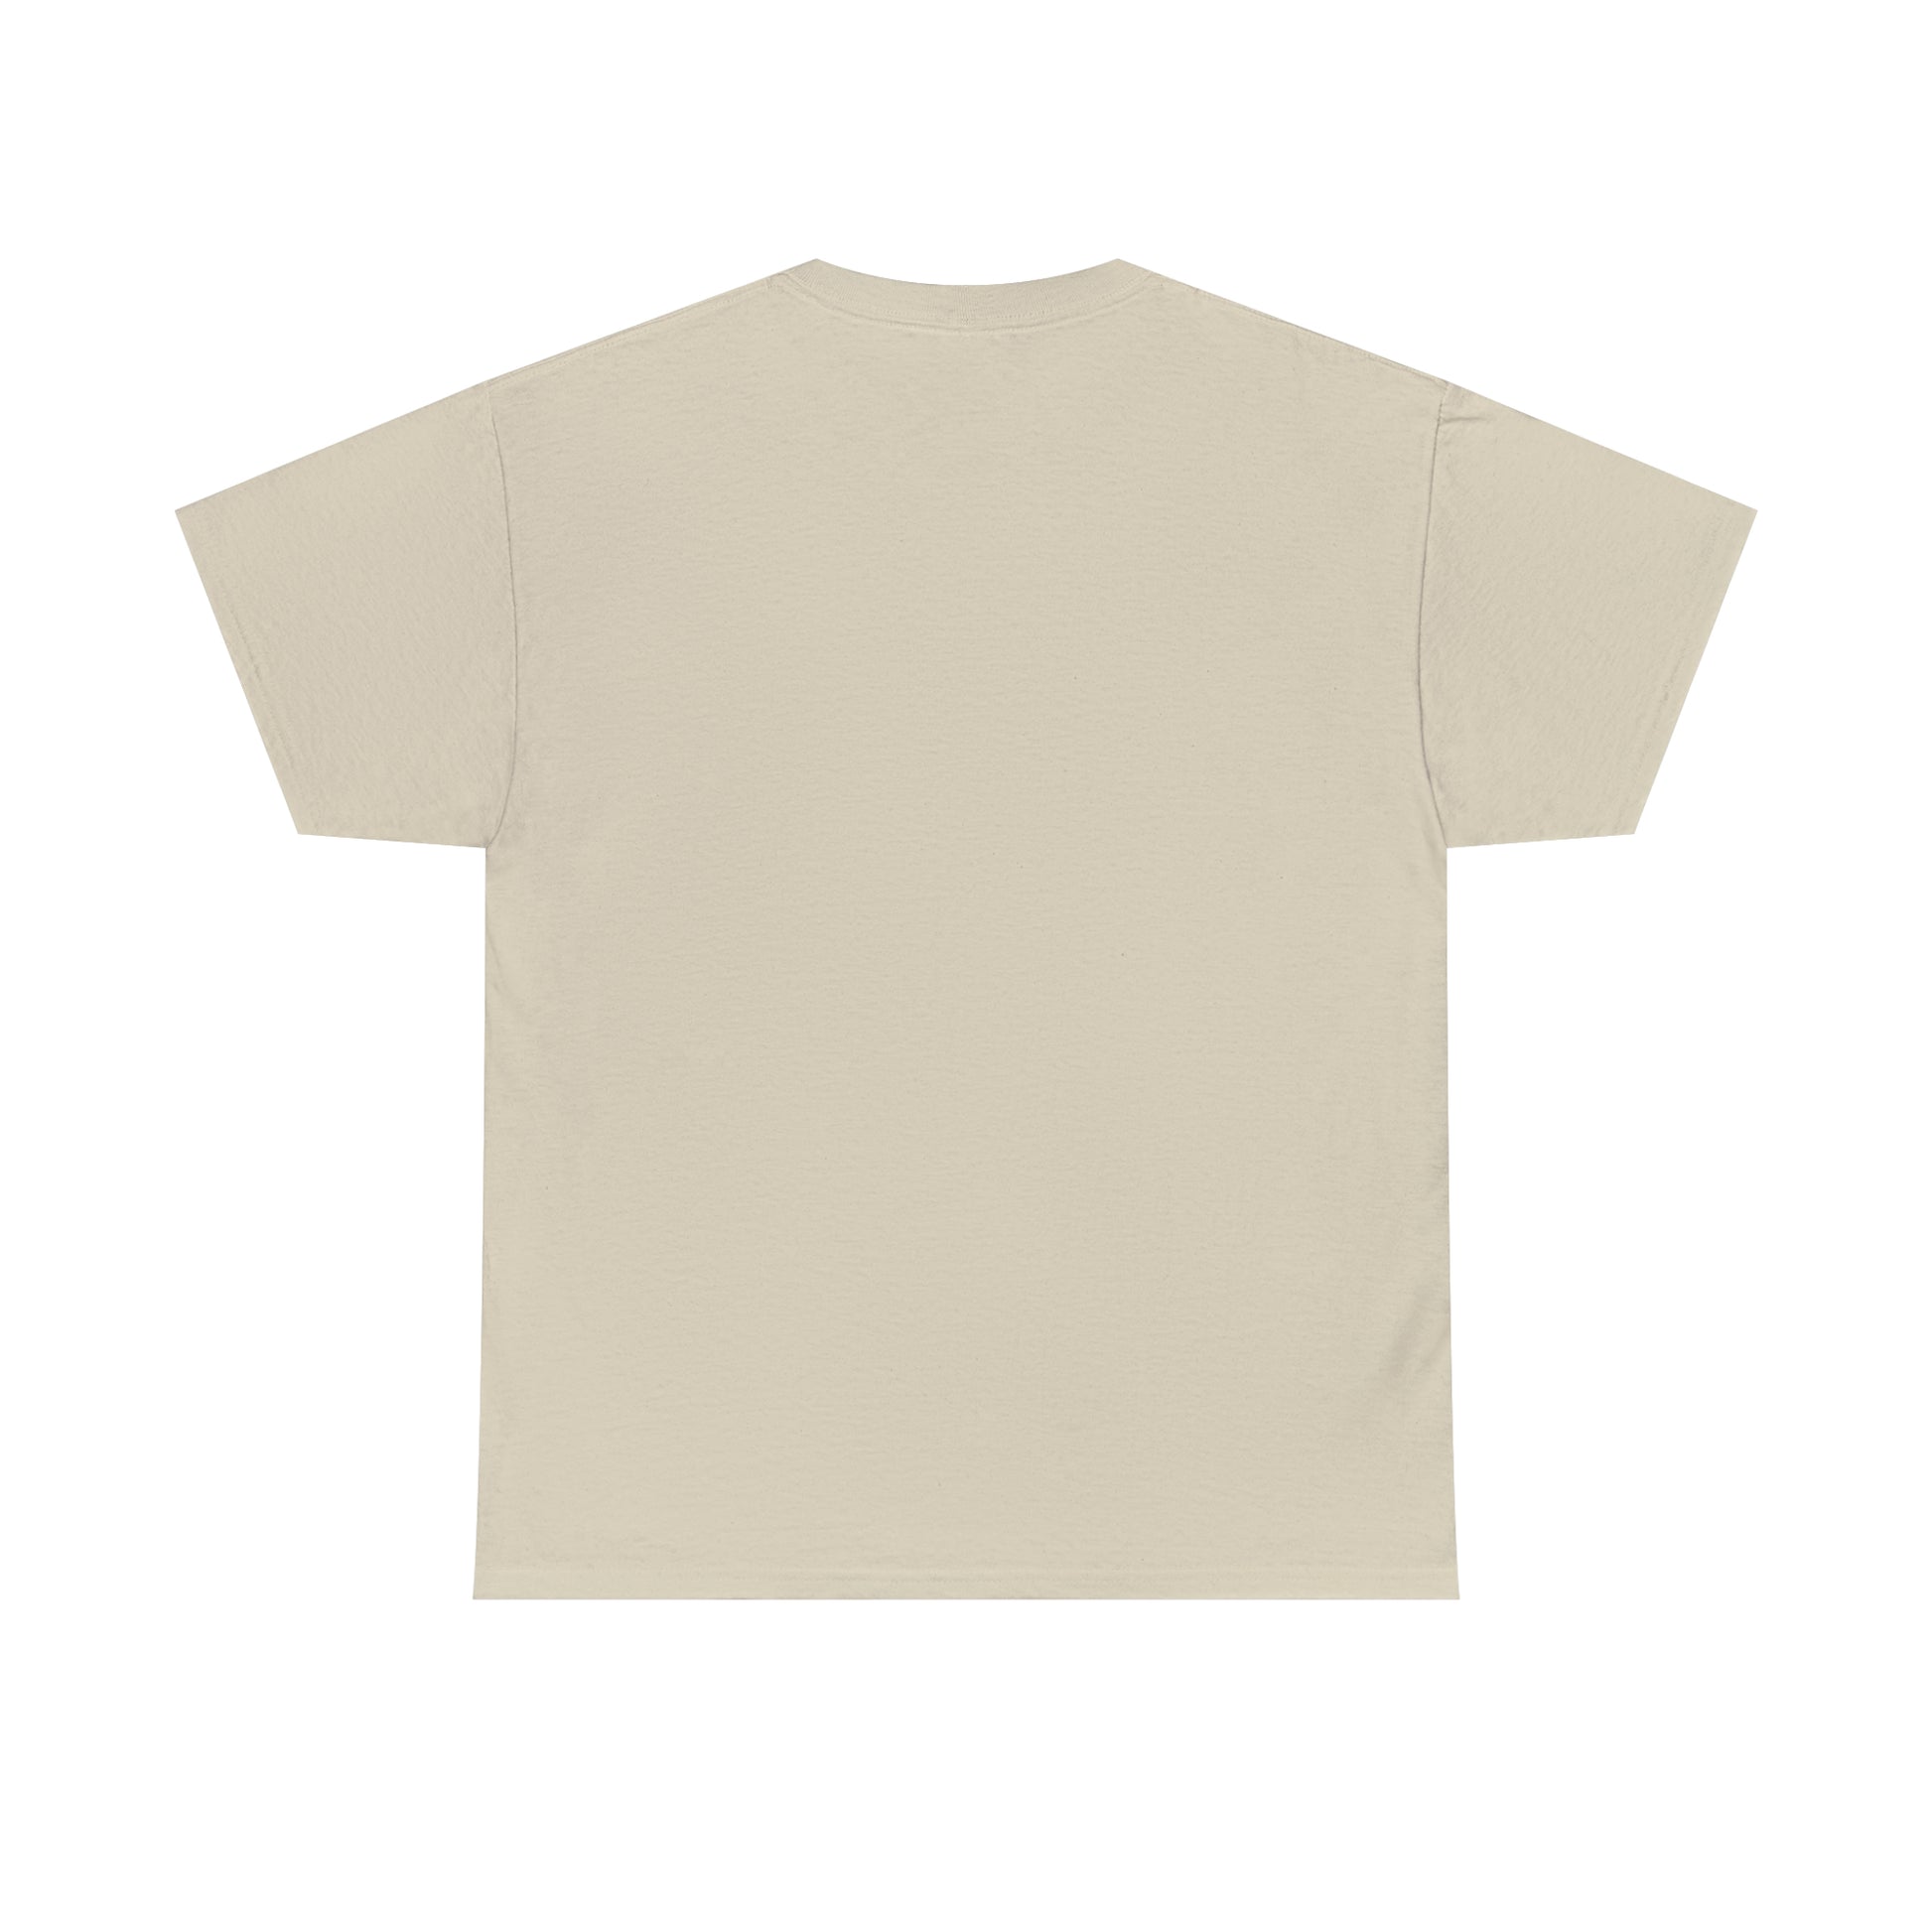 Flat back view of the Sand t-shirt